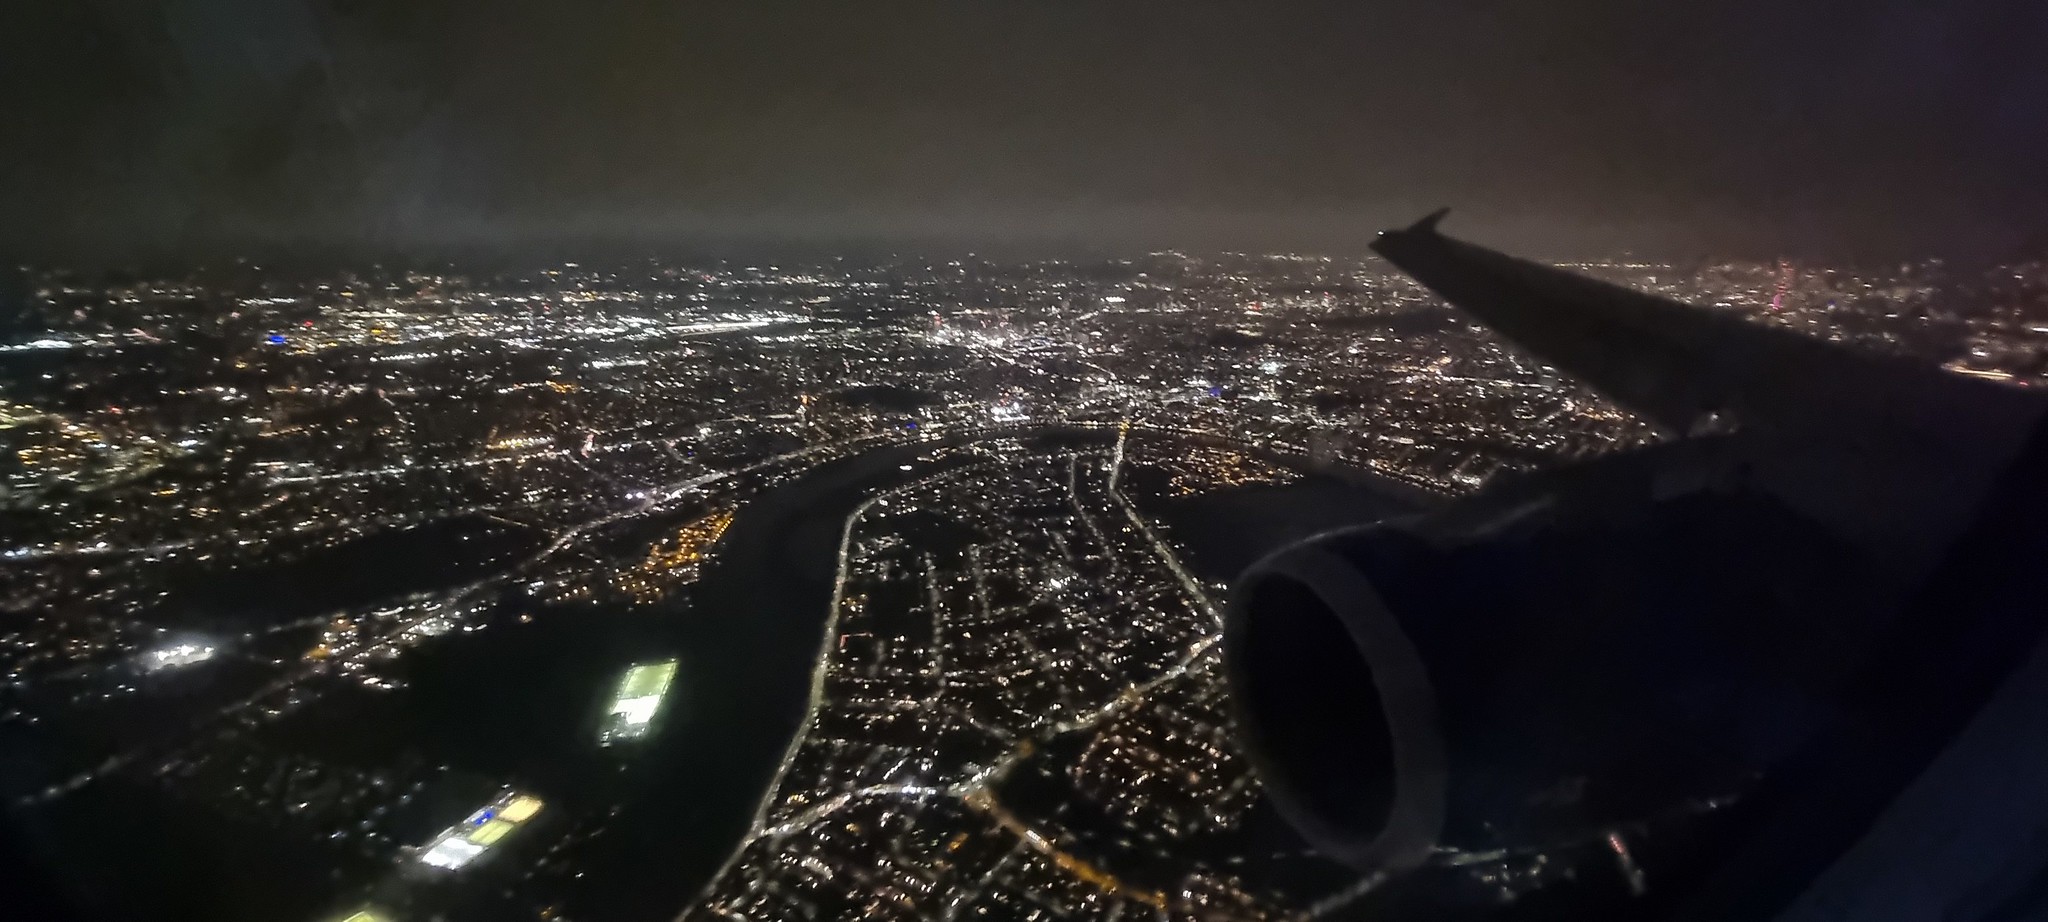 The view of London on final approach into Heathrow